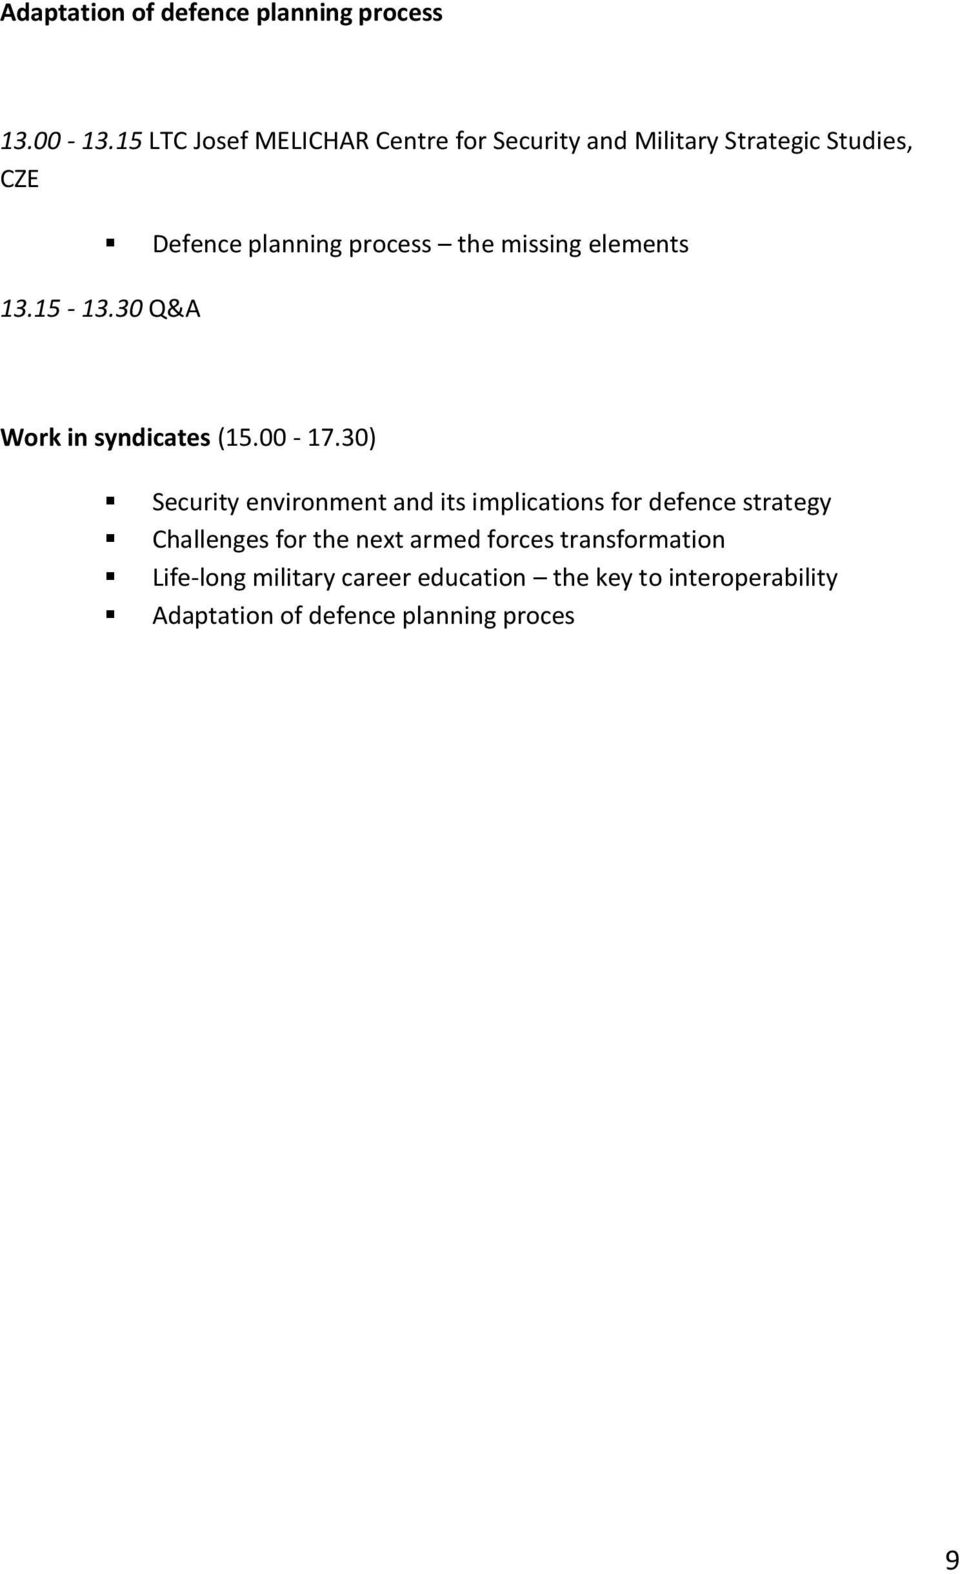 30 Q&A Defence planning process the missing elements Work in syndicates (15.00-17.